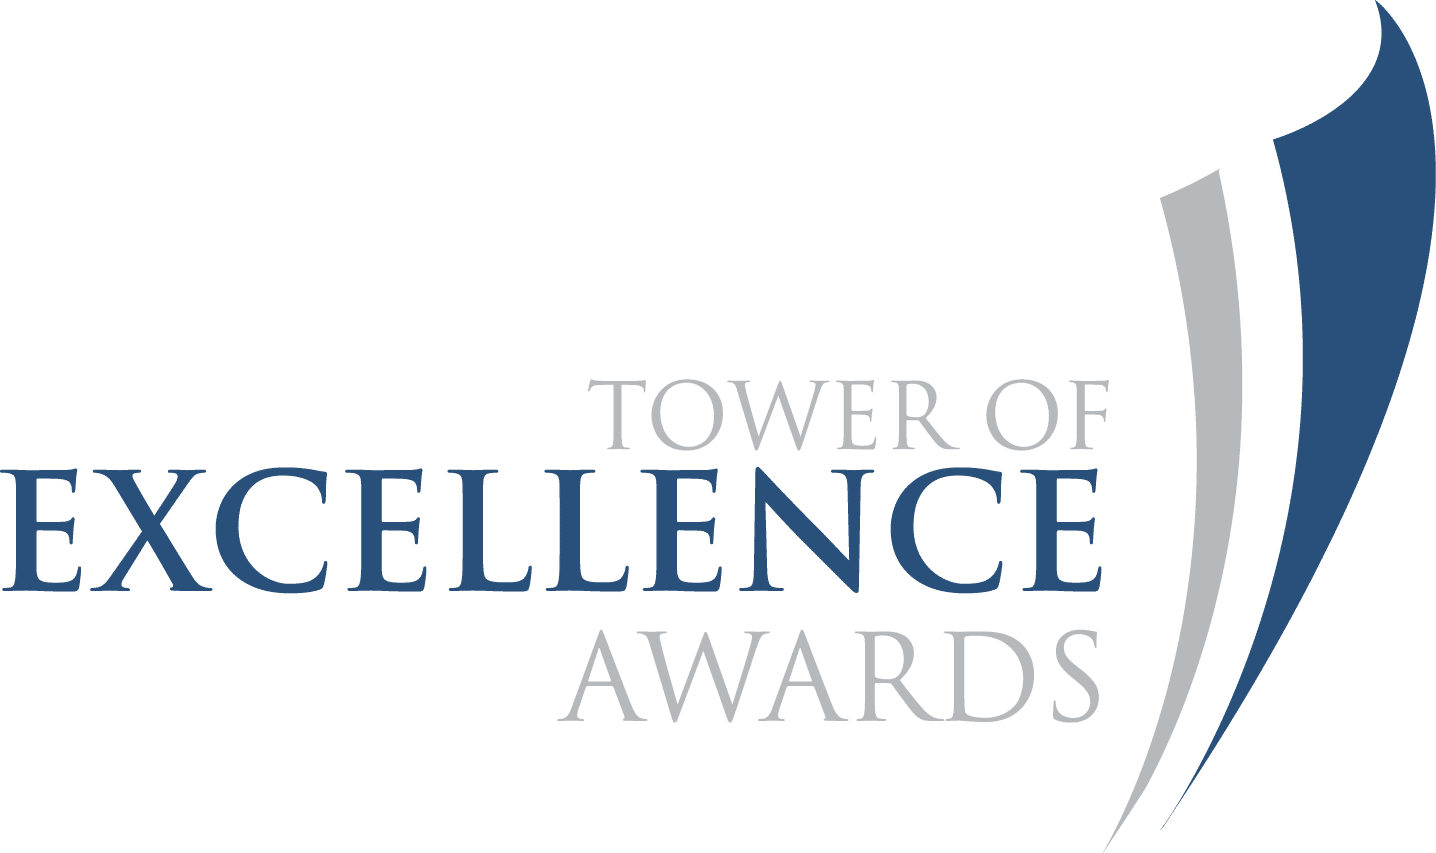 CORPORATE HOUSING PROVIDERS ASSOCIATION ANNOUNCES 2020 TOWER OF EXCELLENCE AWARD WINNERS